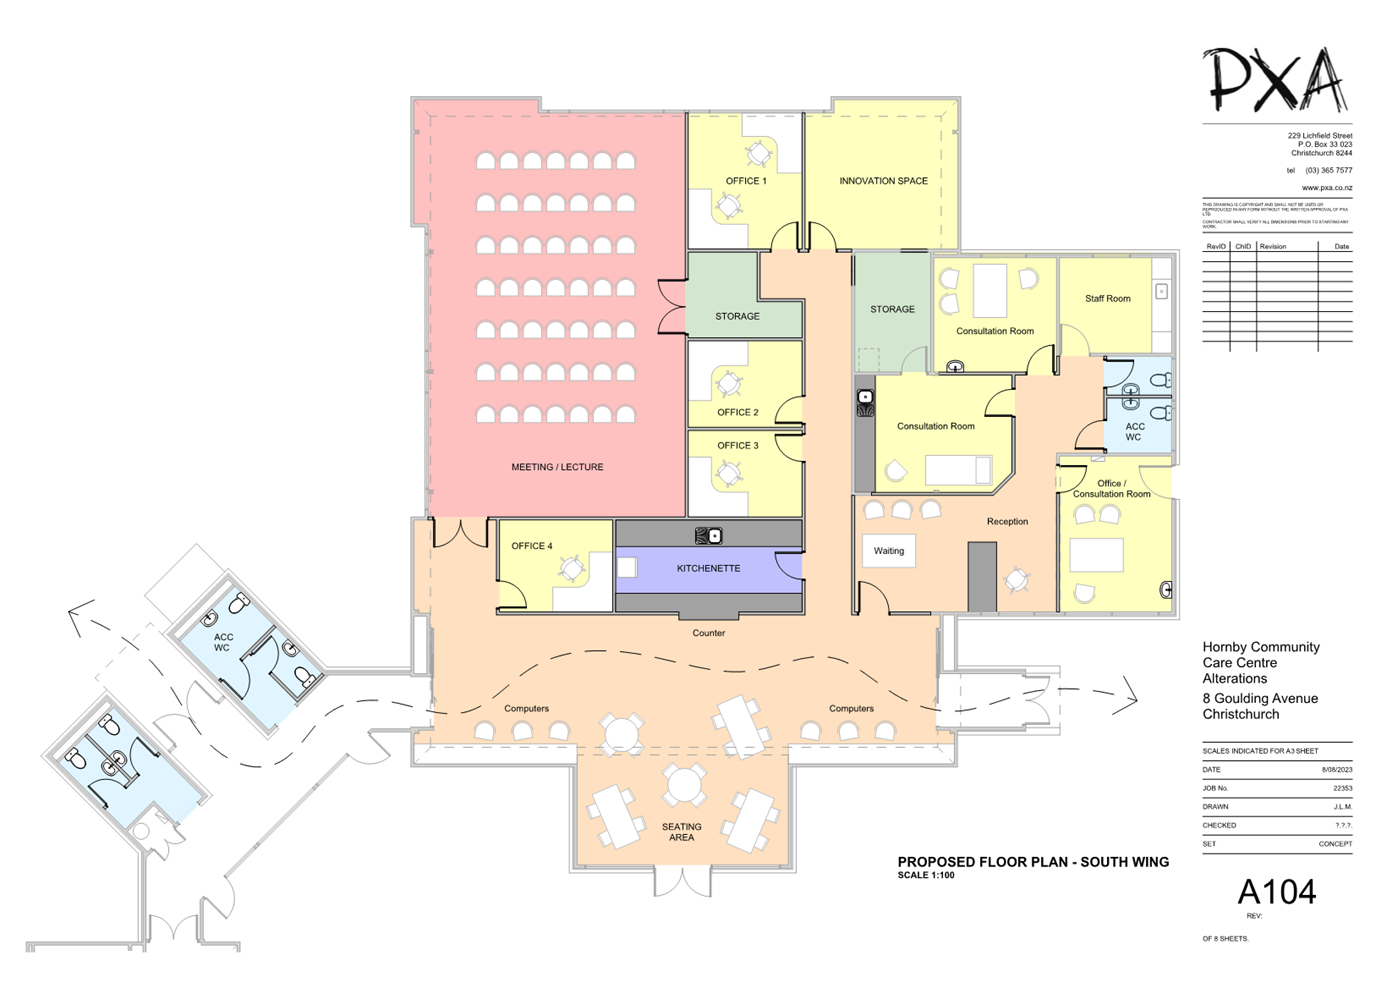 A floor plan of a building

Description automatically generated